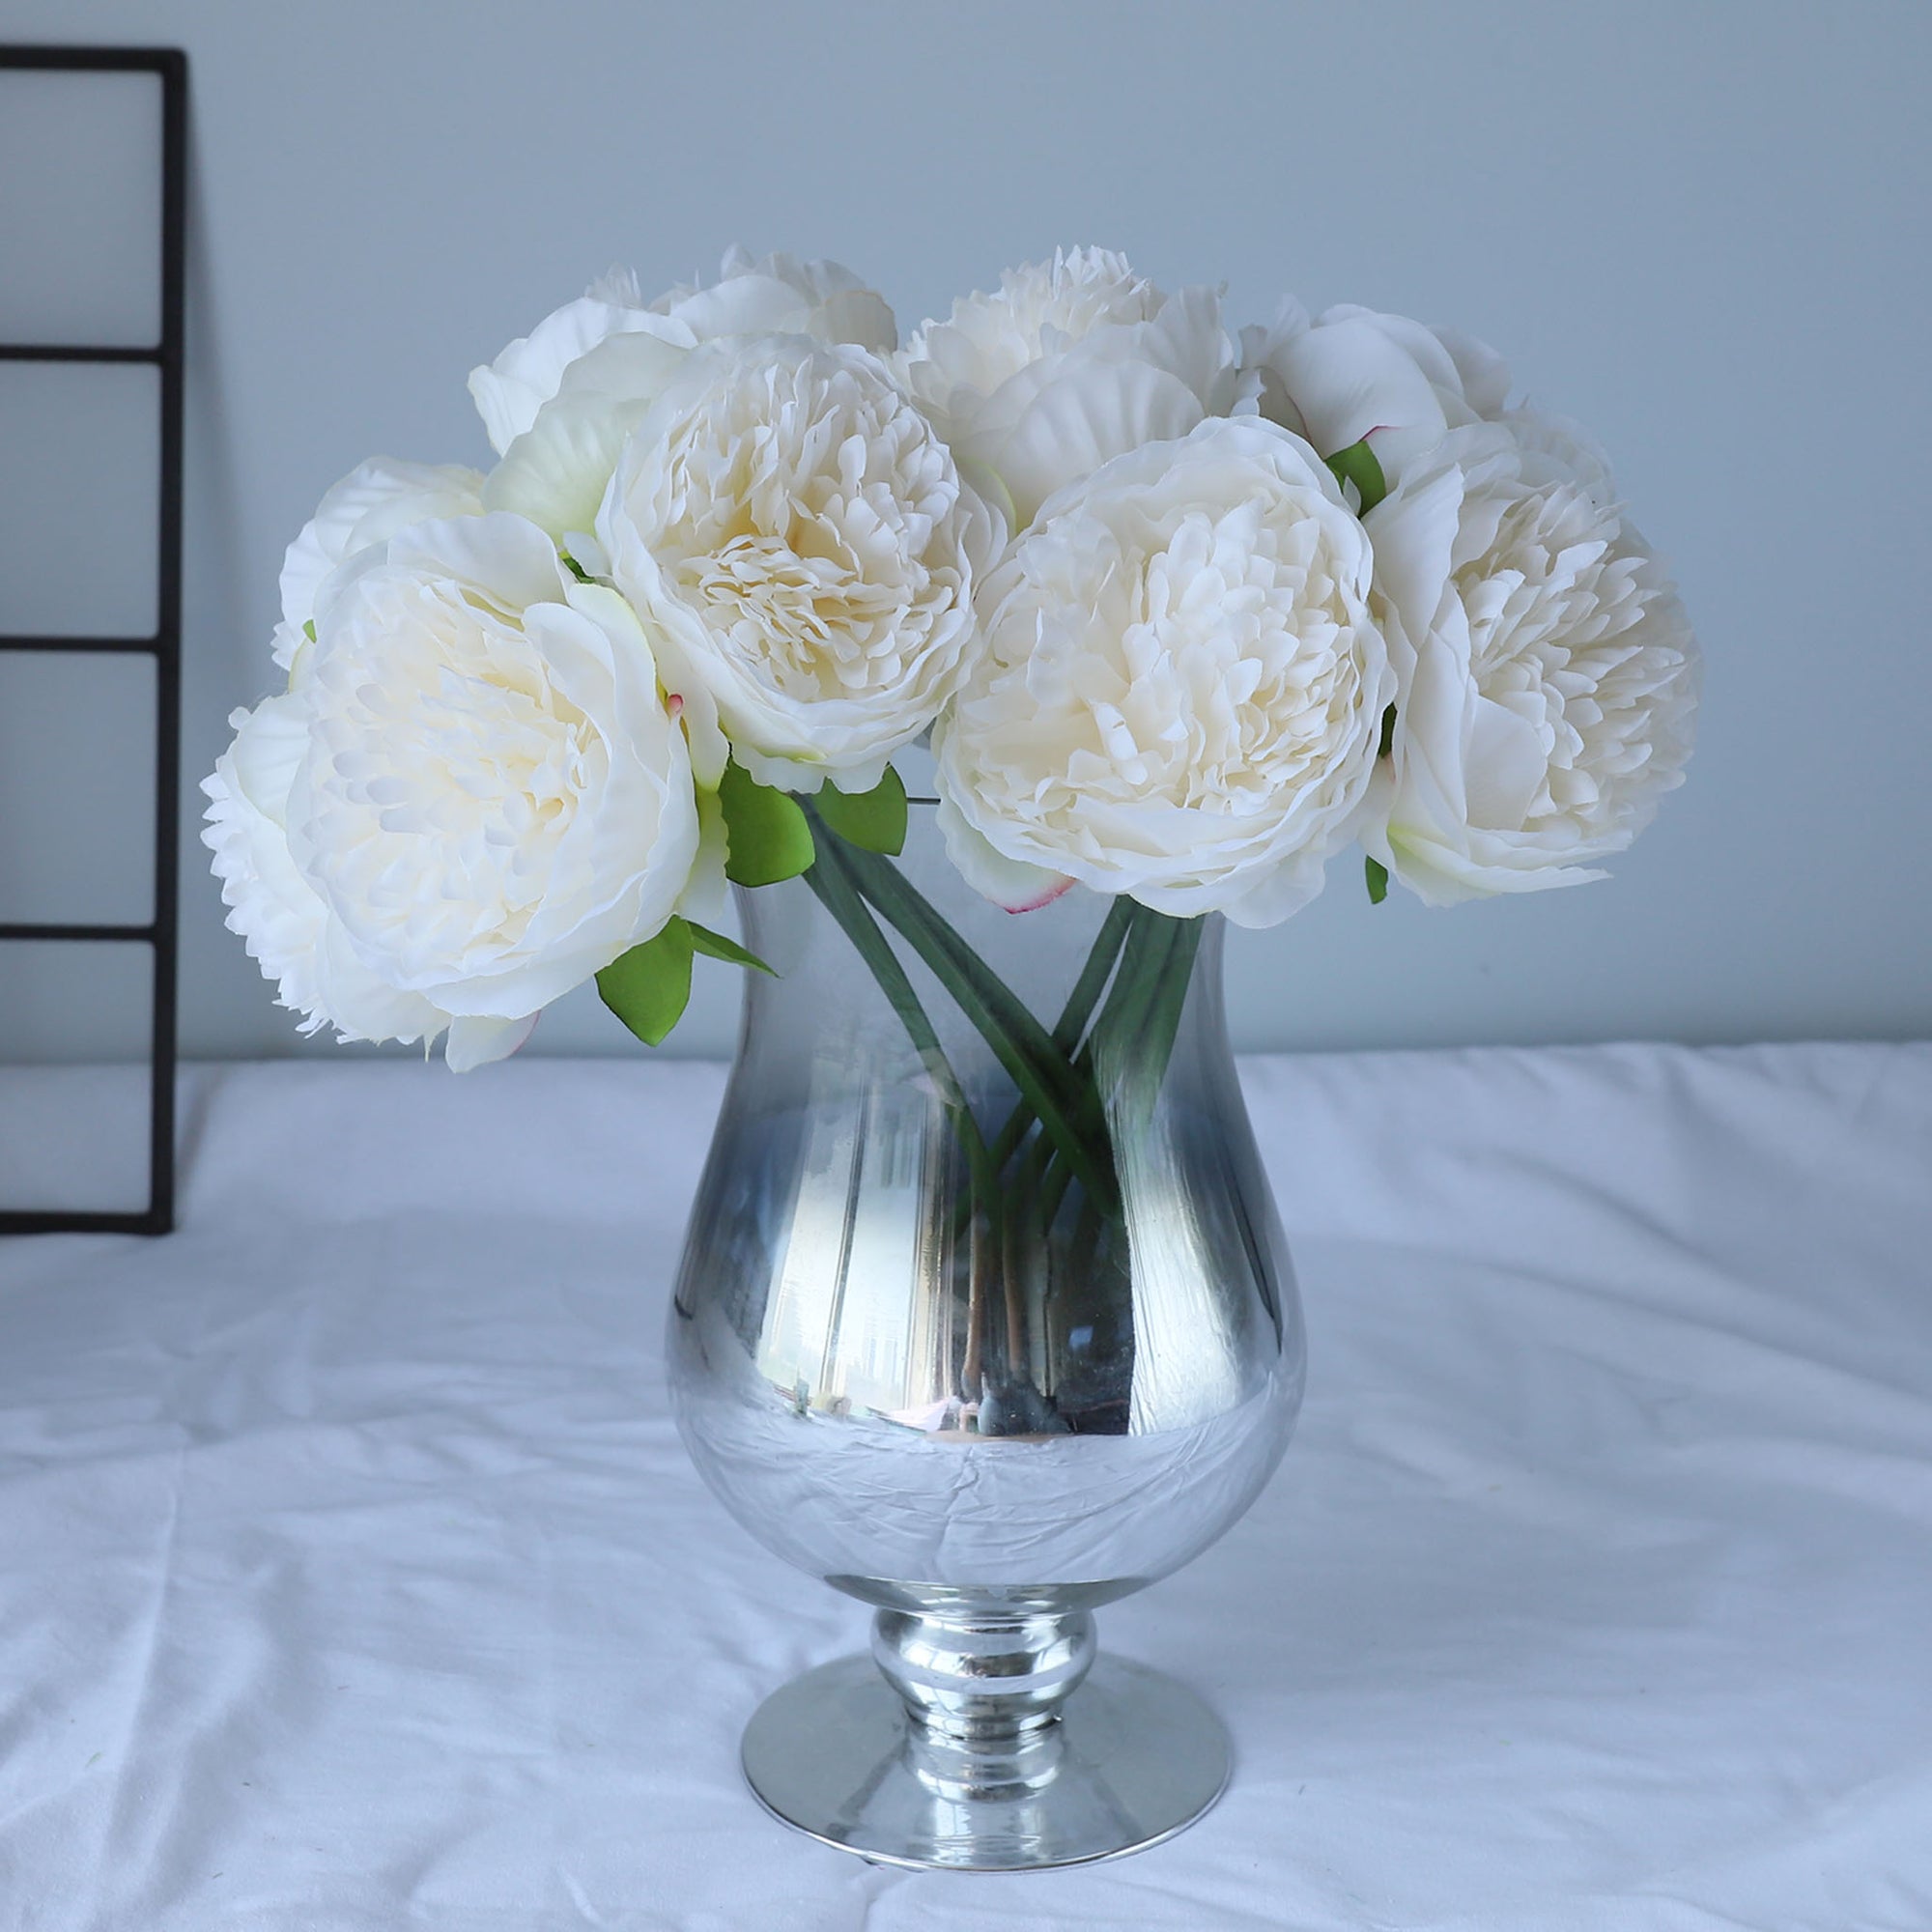 White Flowers Silk Peony Bouquet 5 Heads Artificial Peonies Wedding Decorations